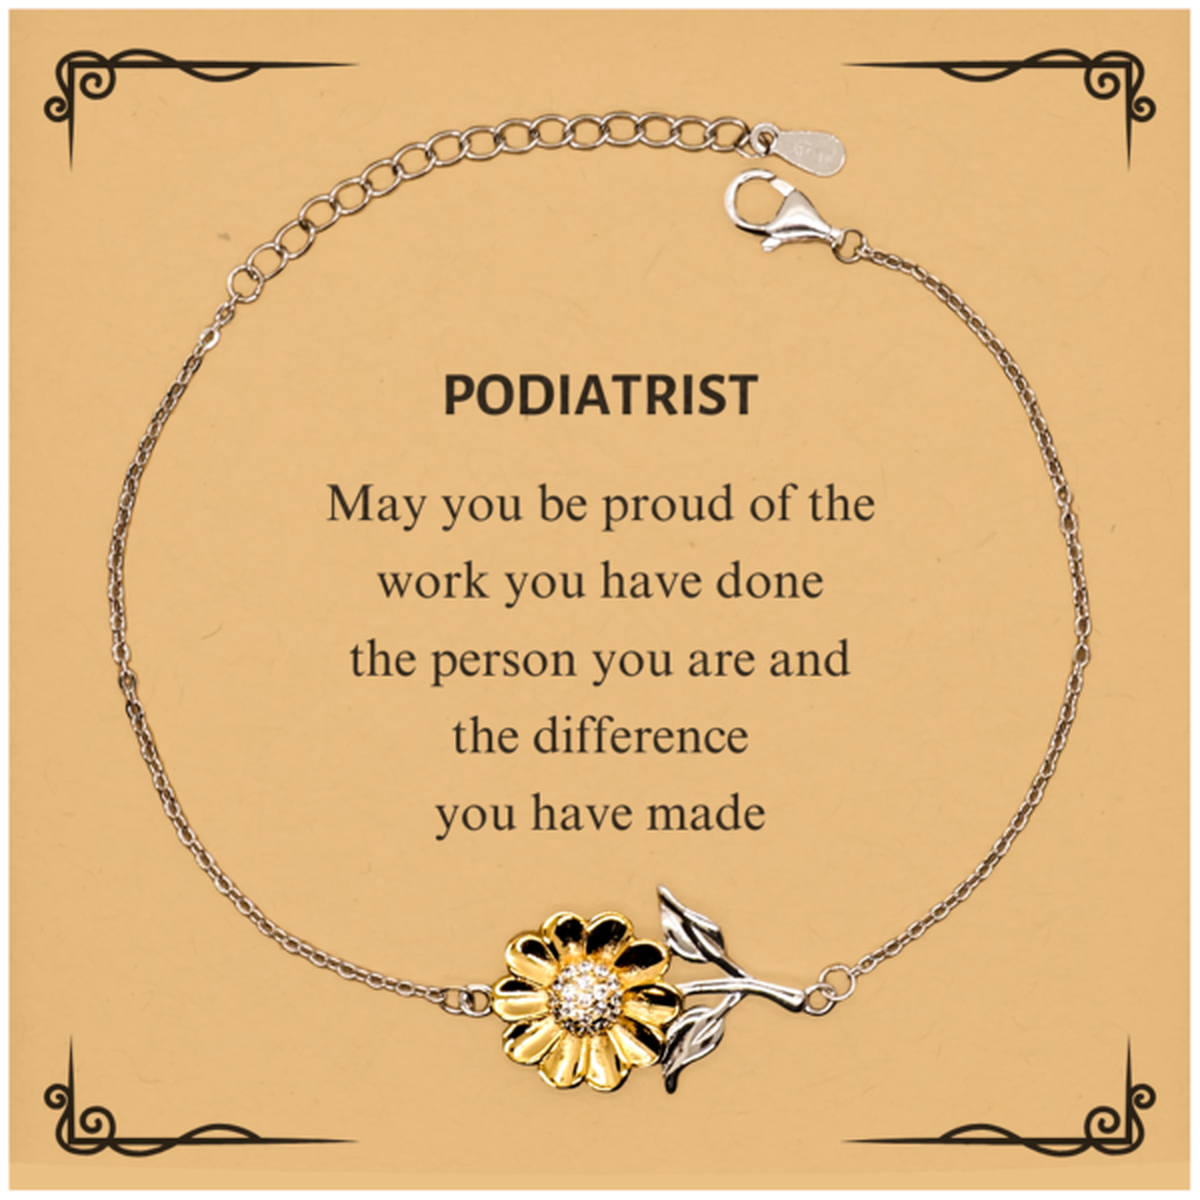 Podiatrist May you be proud of the work you have done, Retirement Podiatrist Sunflower Bracelet for Colleague Appreciation Gifts Amazing for Podiatrist